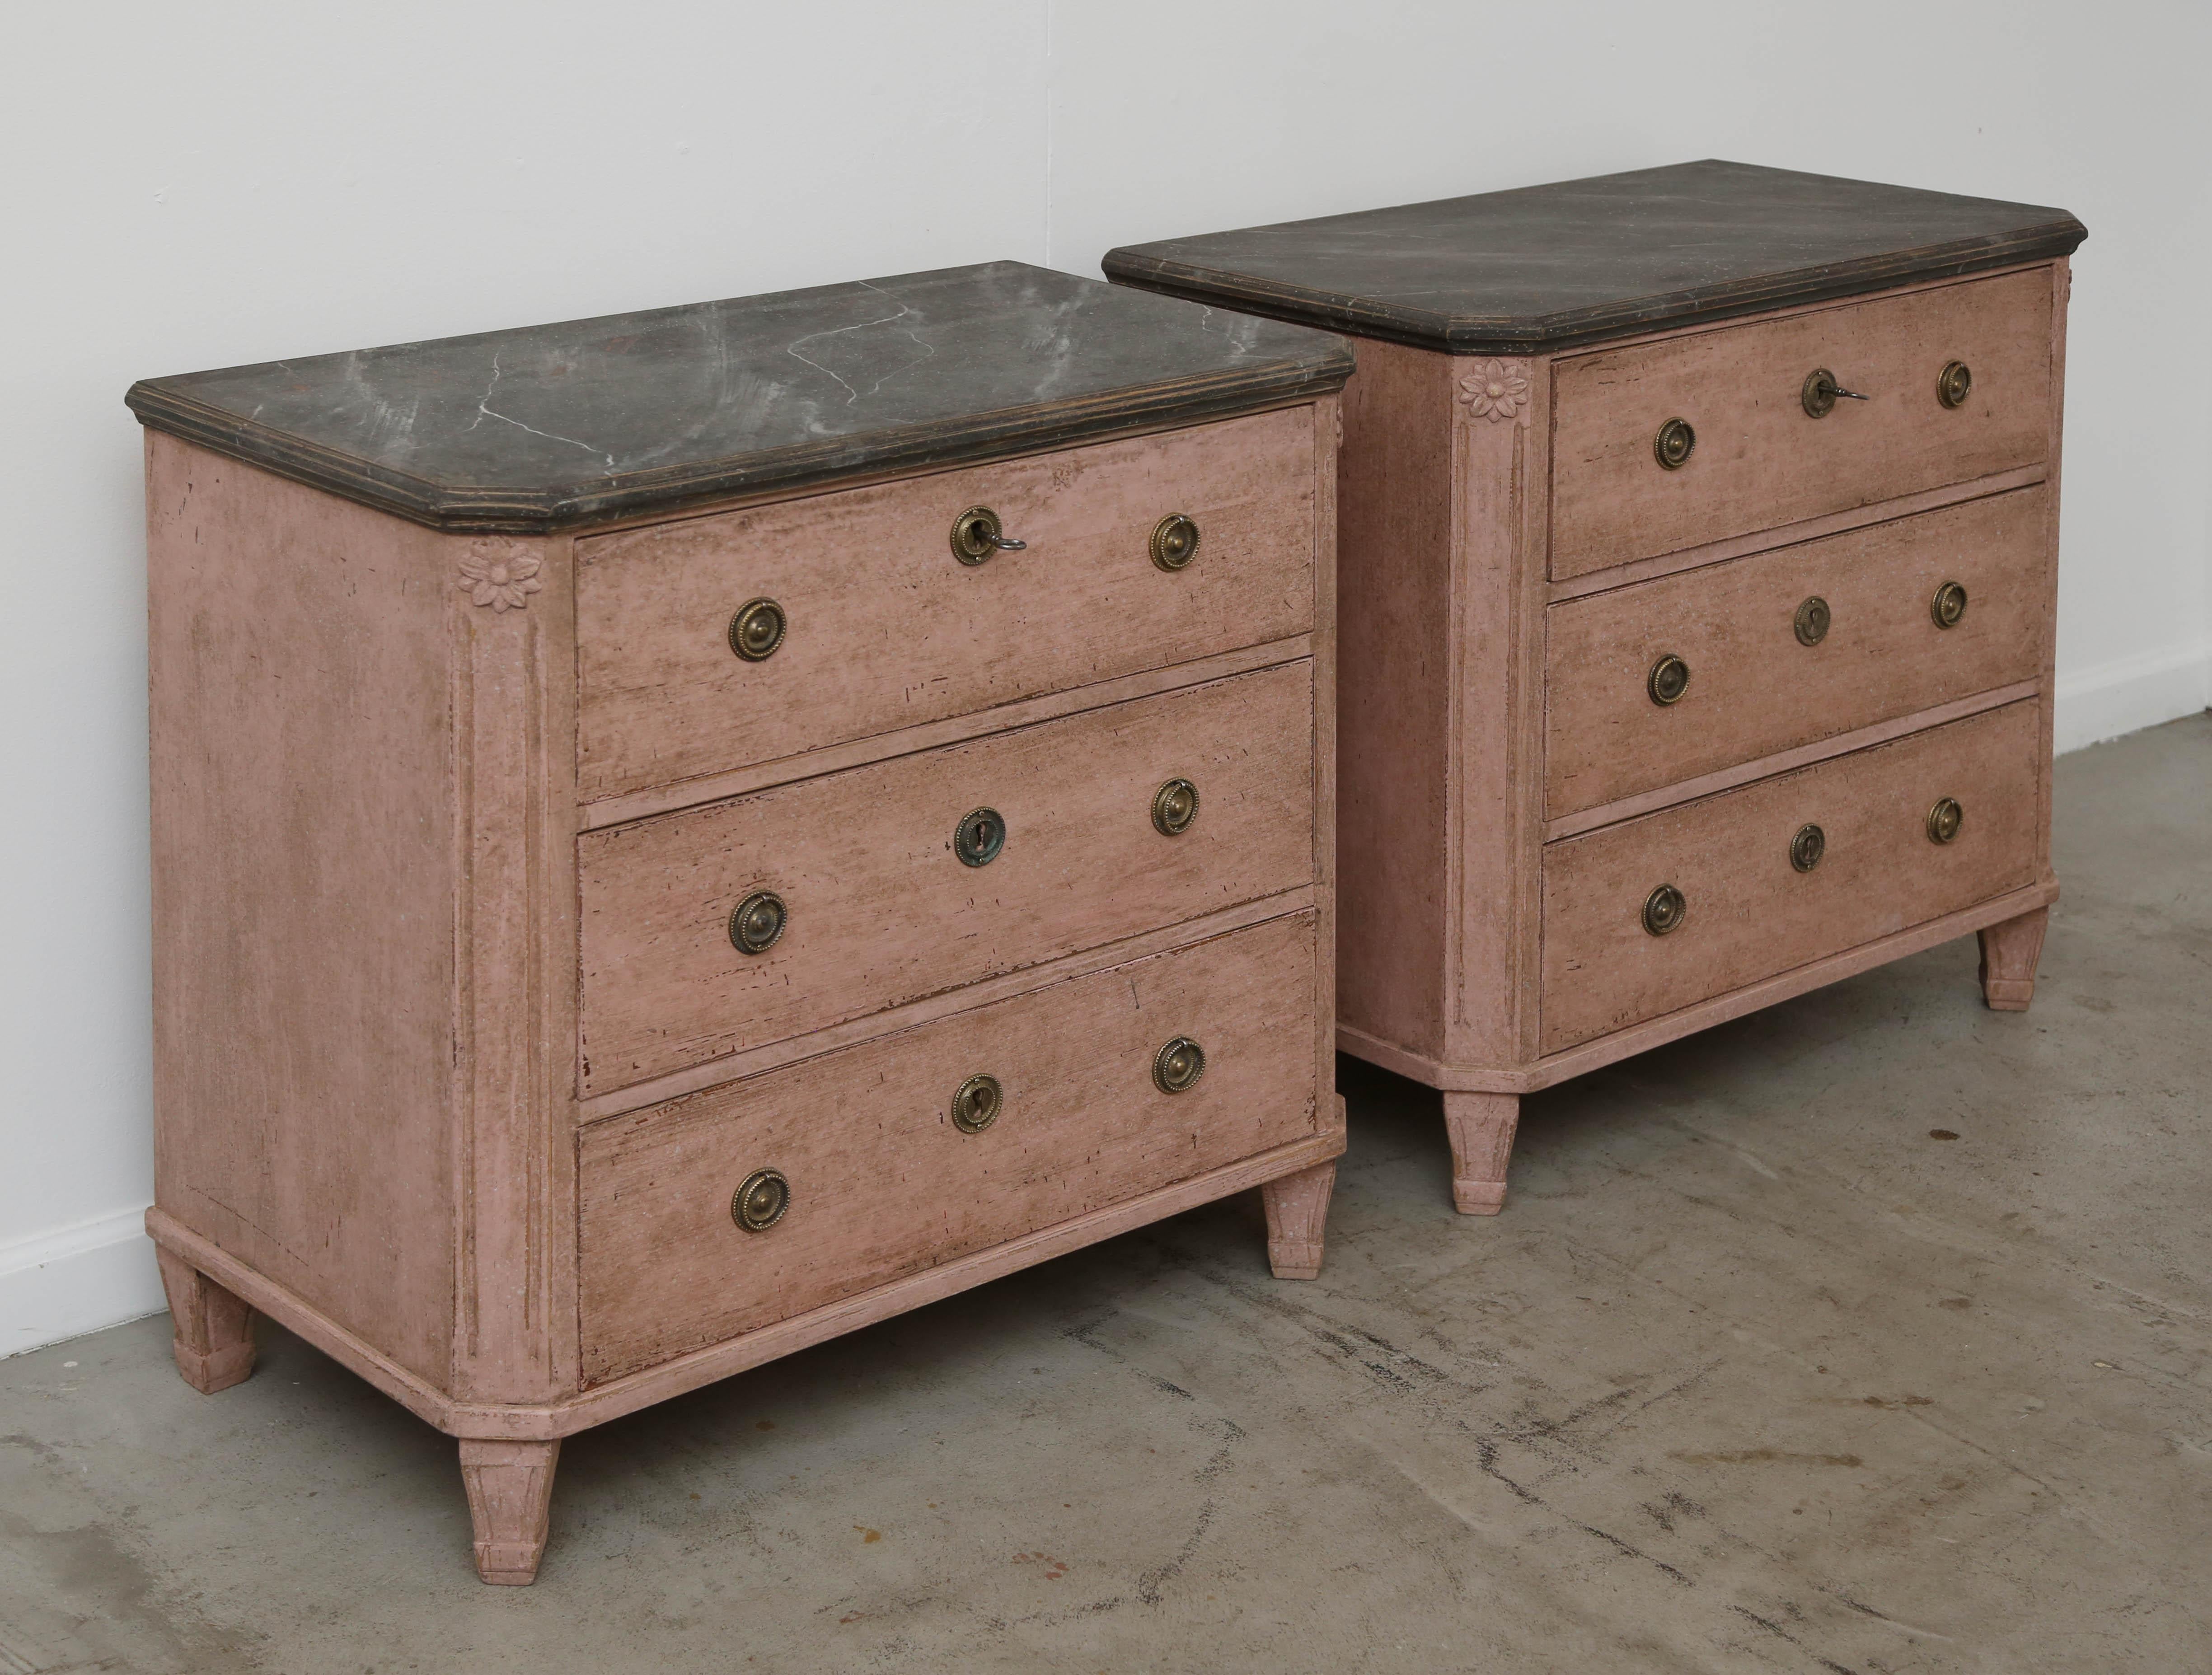 Antique Swedish Gustavian Style Rose Painted Chests with Faux Marble Tops,  5